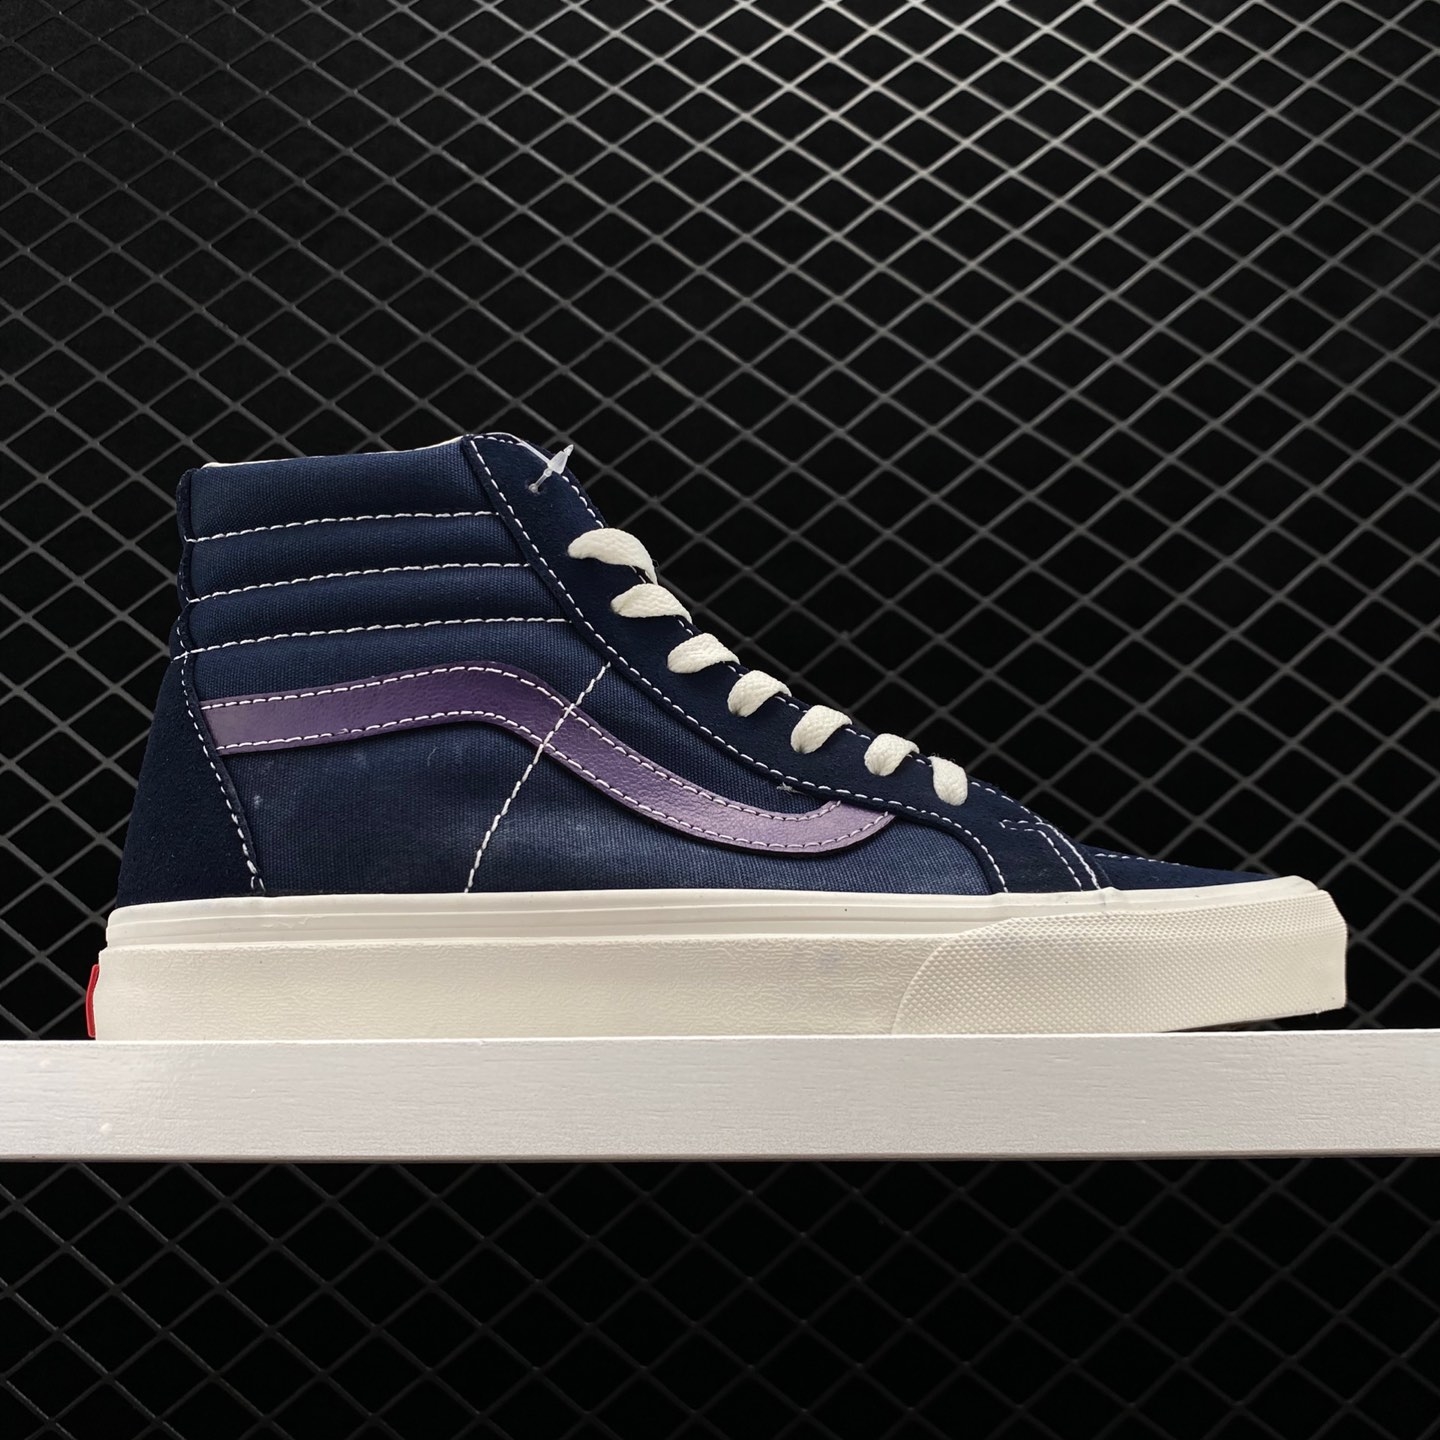 Vans SK8-HI Purple Green VN0A4BVB20T - Trendy Skate Shoes for Style and Comfort